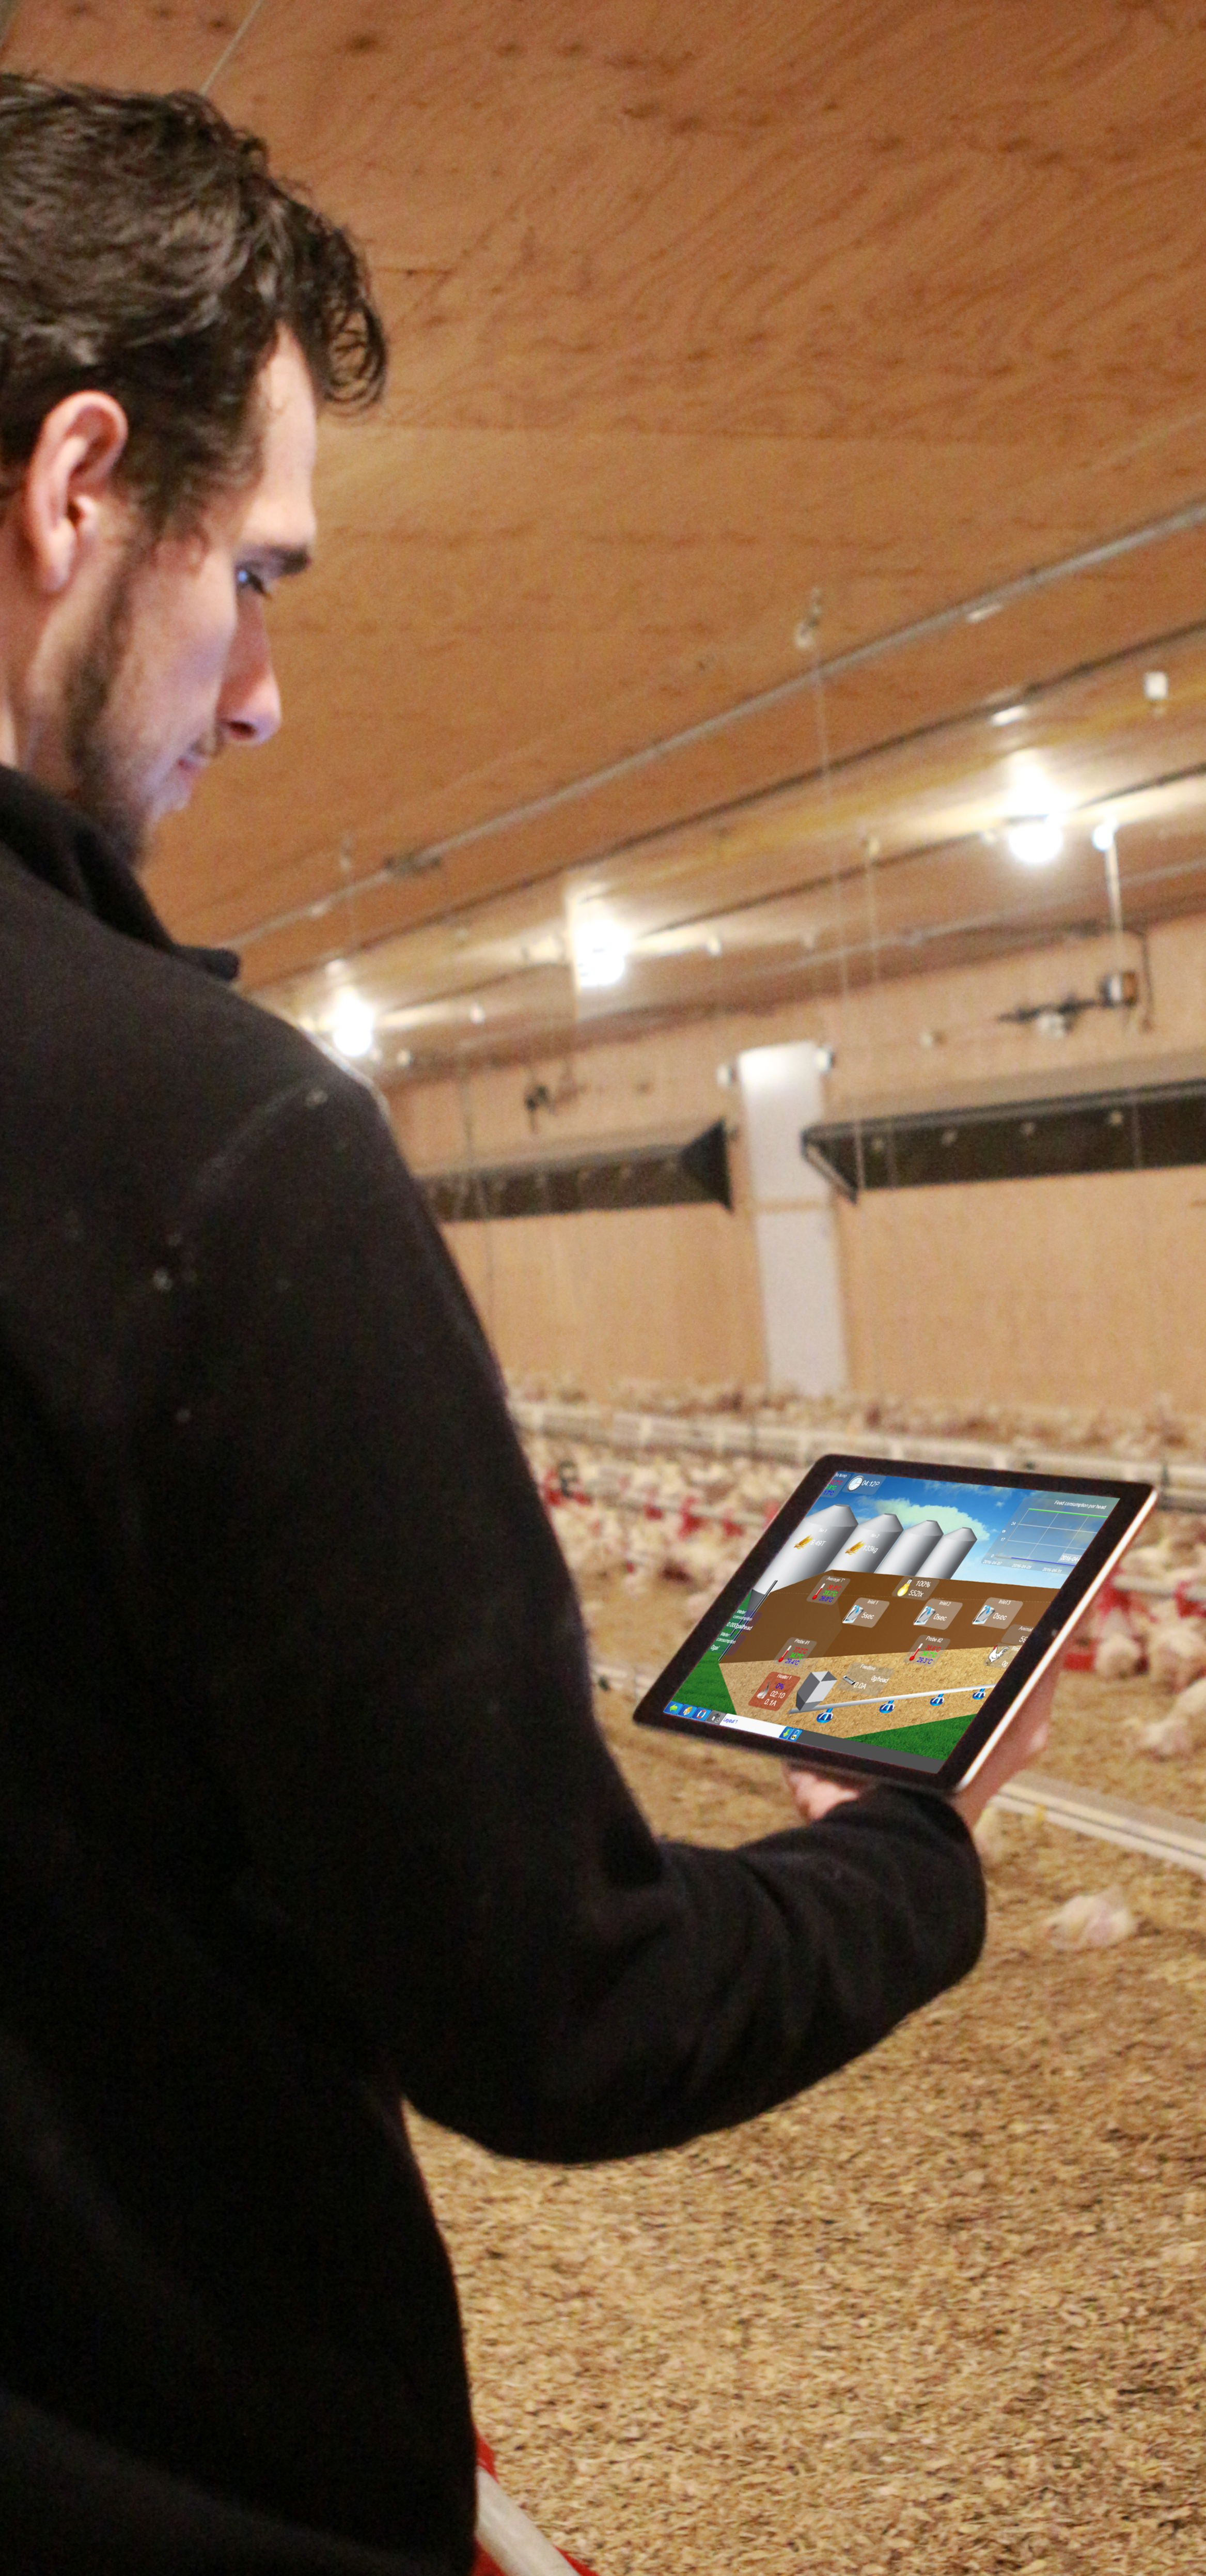 Poultry Management System - MAXIMUS Barn Overview on iPad